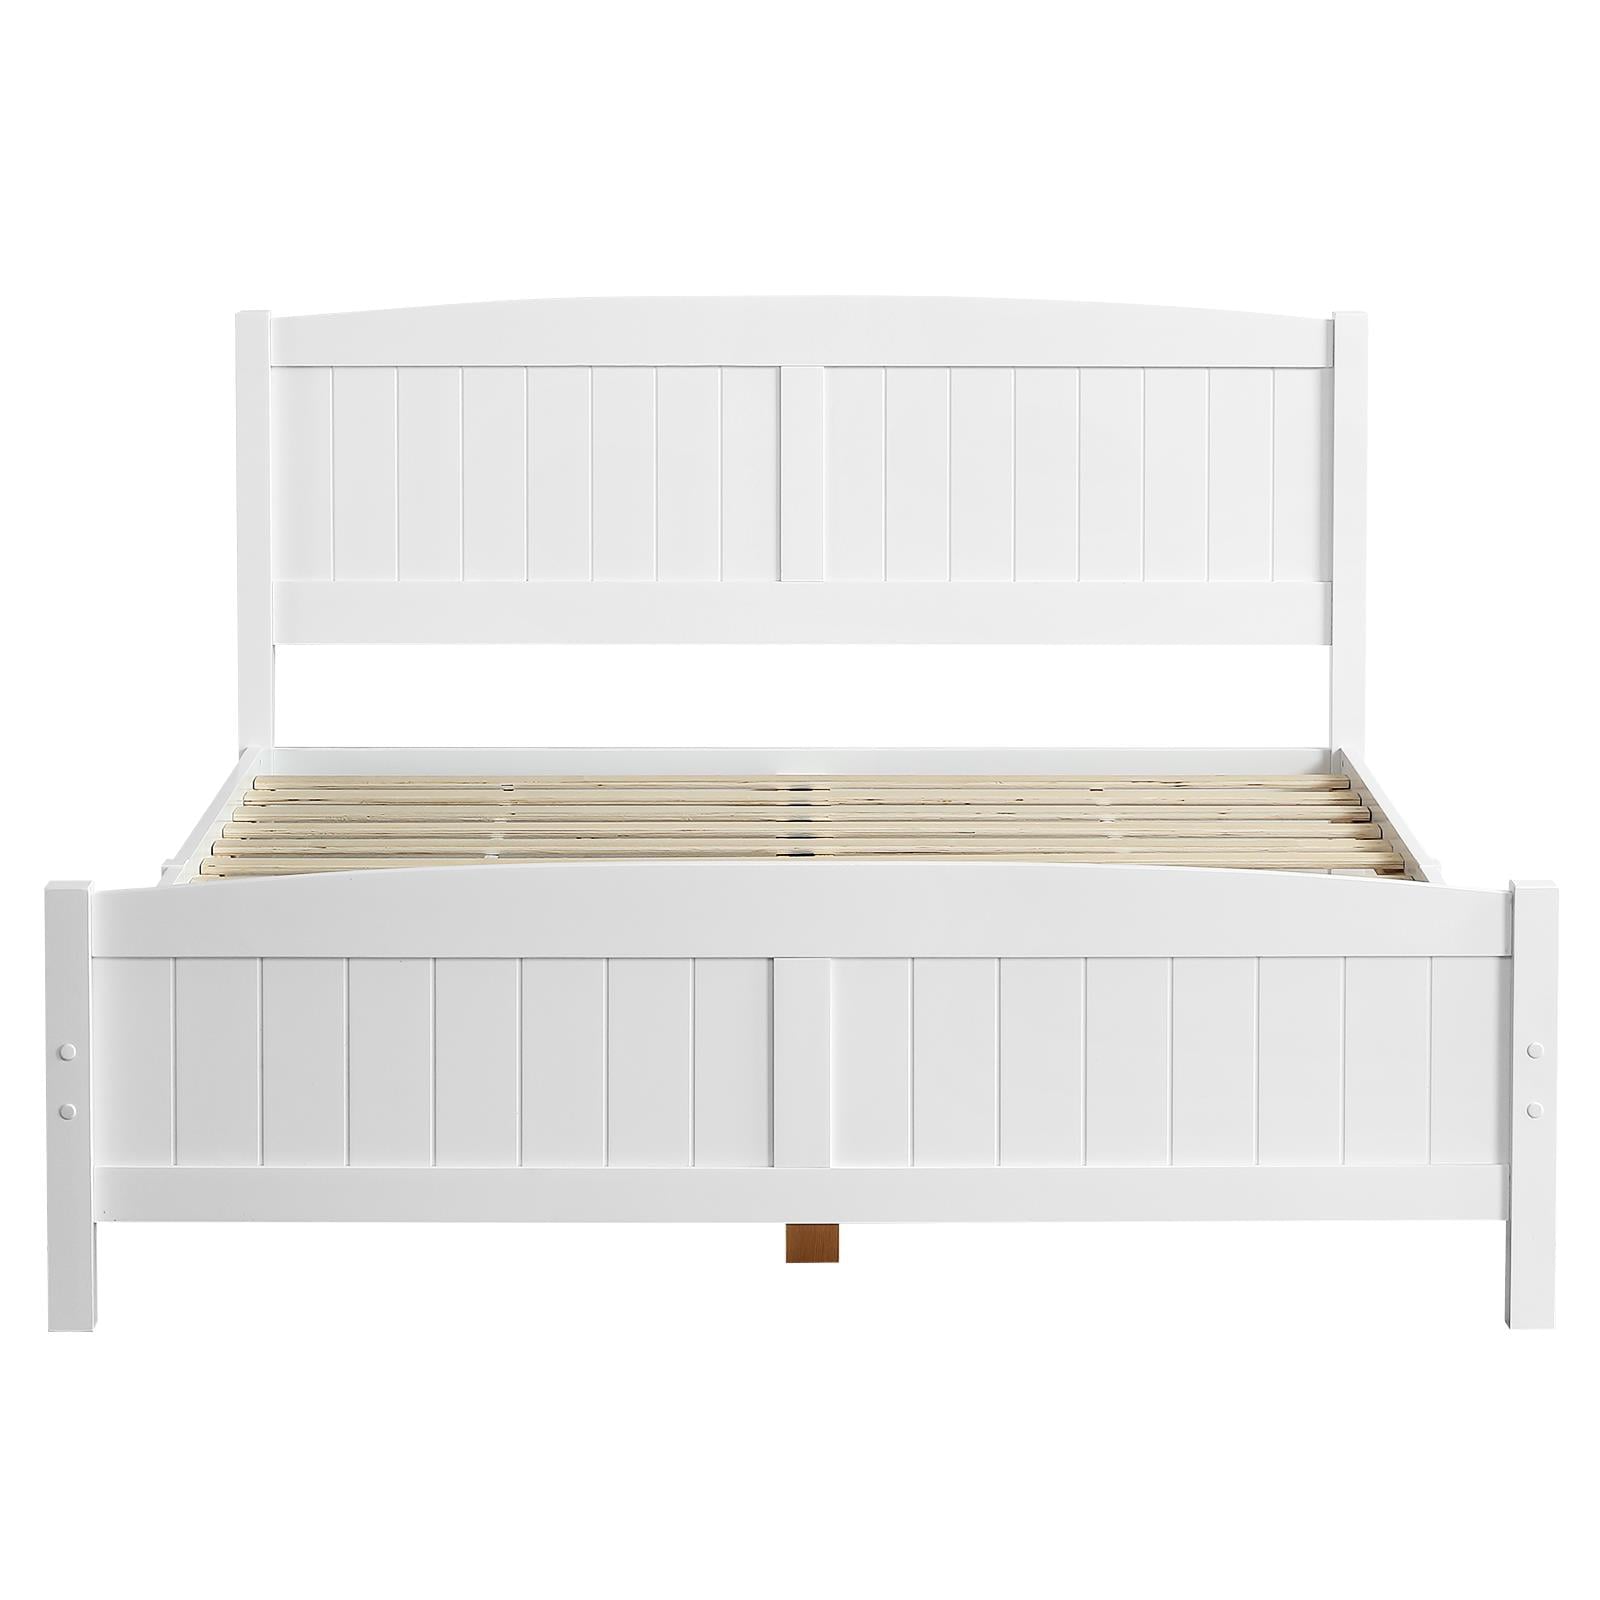 Zimtown Queen Bed Frame,Solid Pine Wood Kids Twin Platform Bed Frame, Bedroom Queen Bed with Headboard for Adults, White